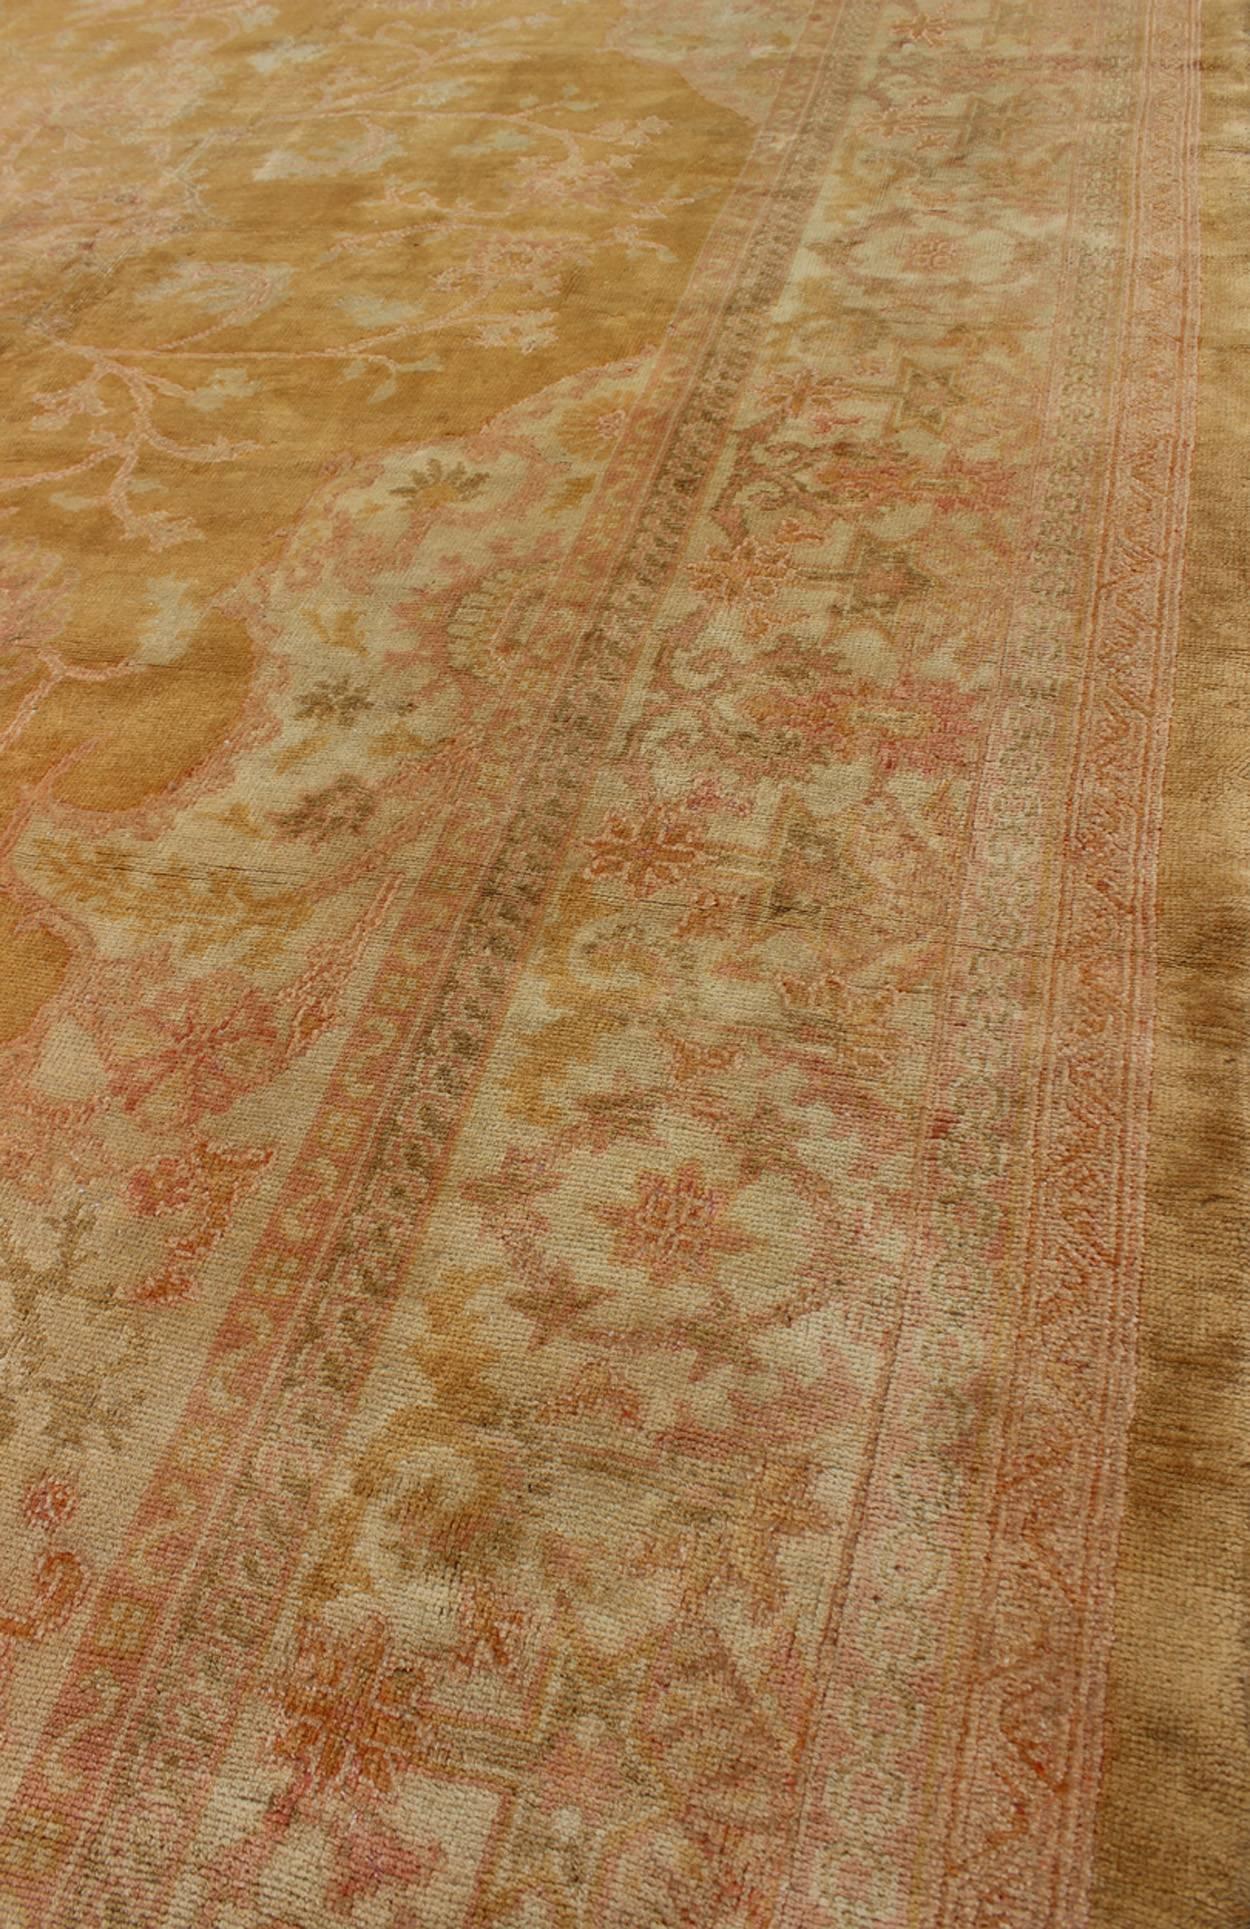 Stunning Antique Fine Burlu Oushak Rug in Gold and Neutral Tones In Good Condition For Sale In Atlanta, GA